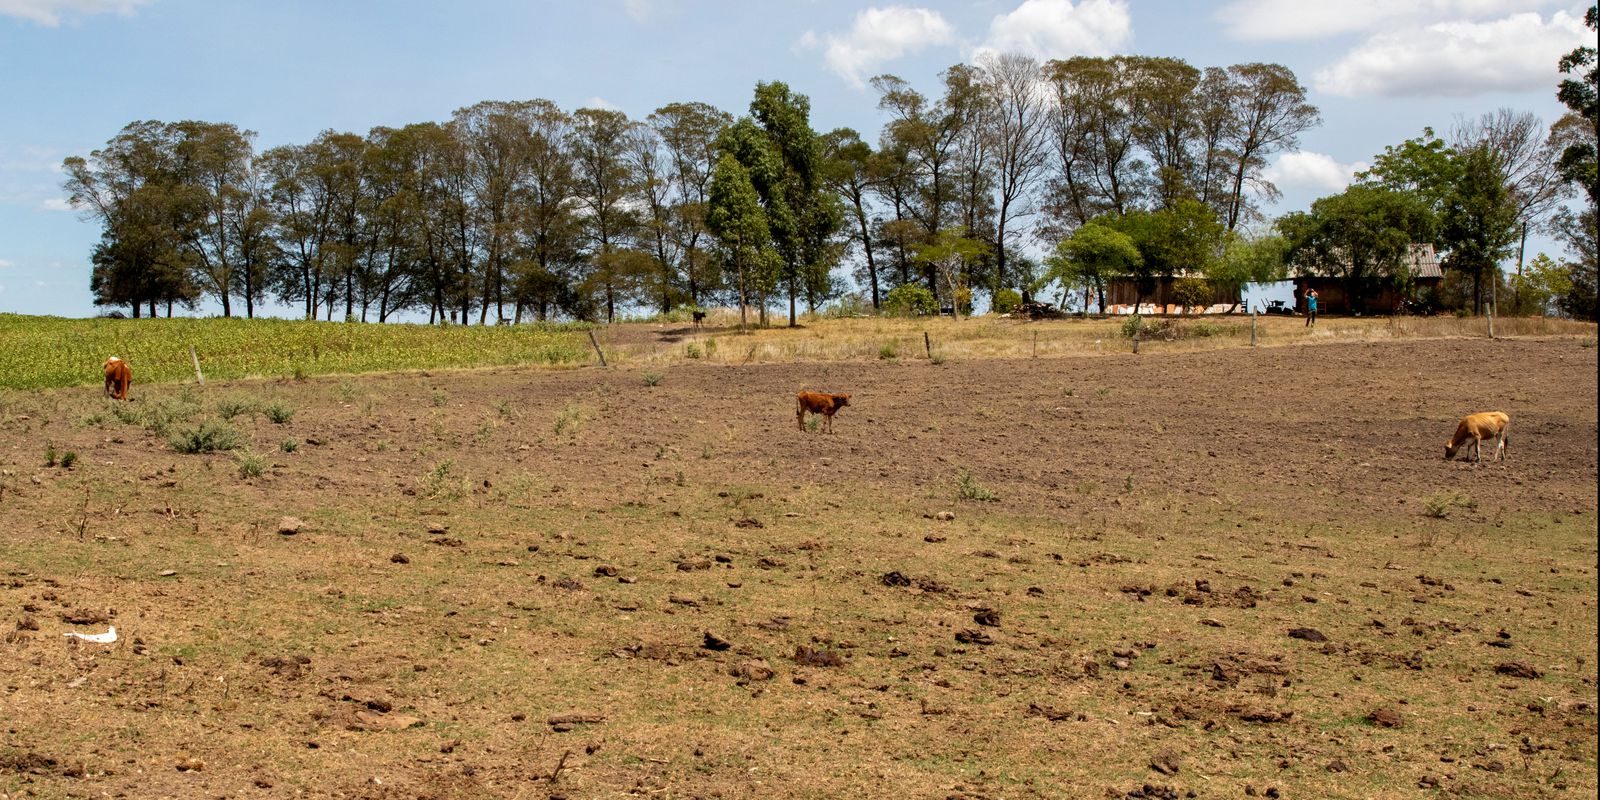 Cities in Rio Grande do Sul will receive another R$ 701,000 to combat drought